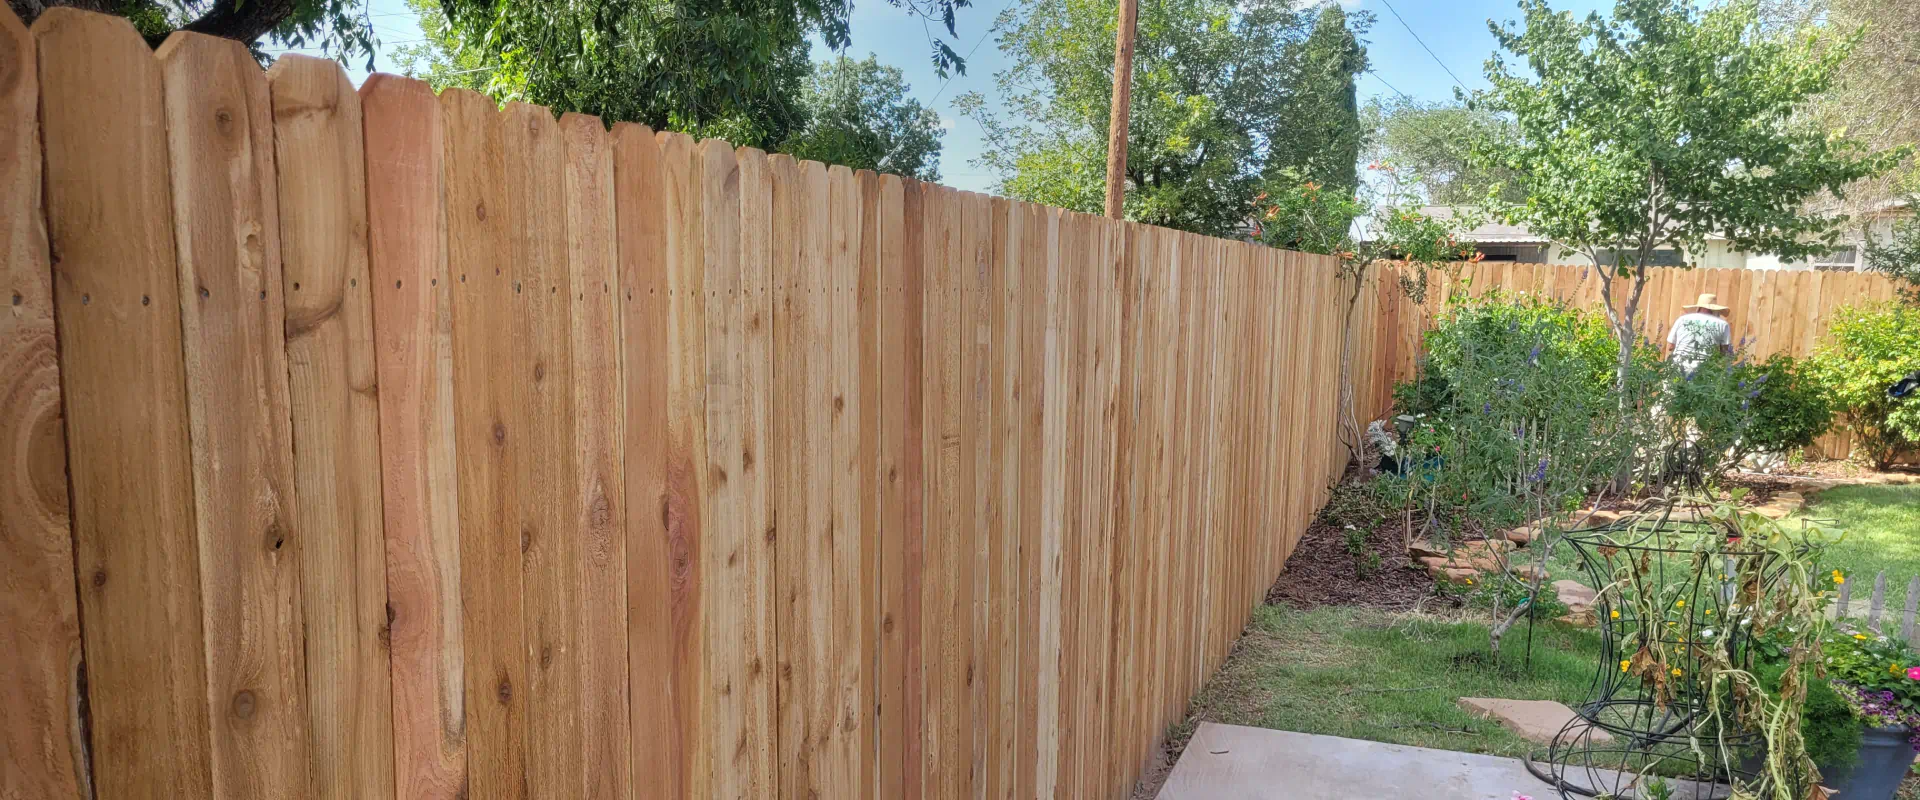 newly installed wooden fence in a house backyard